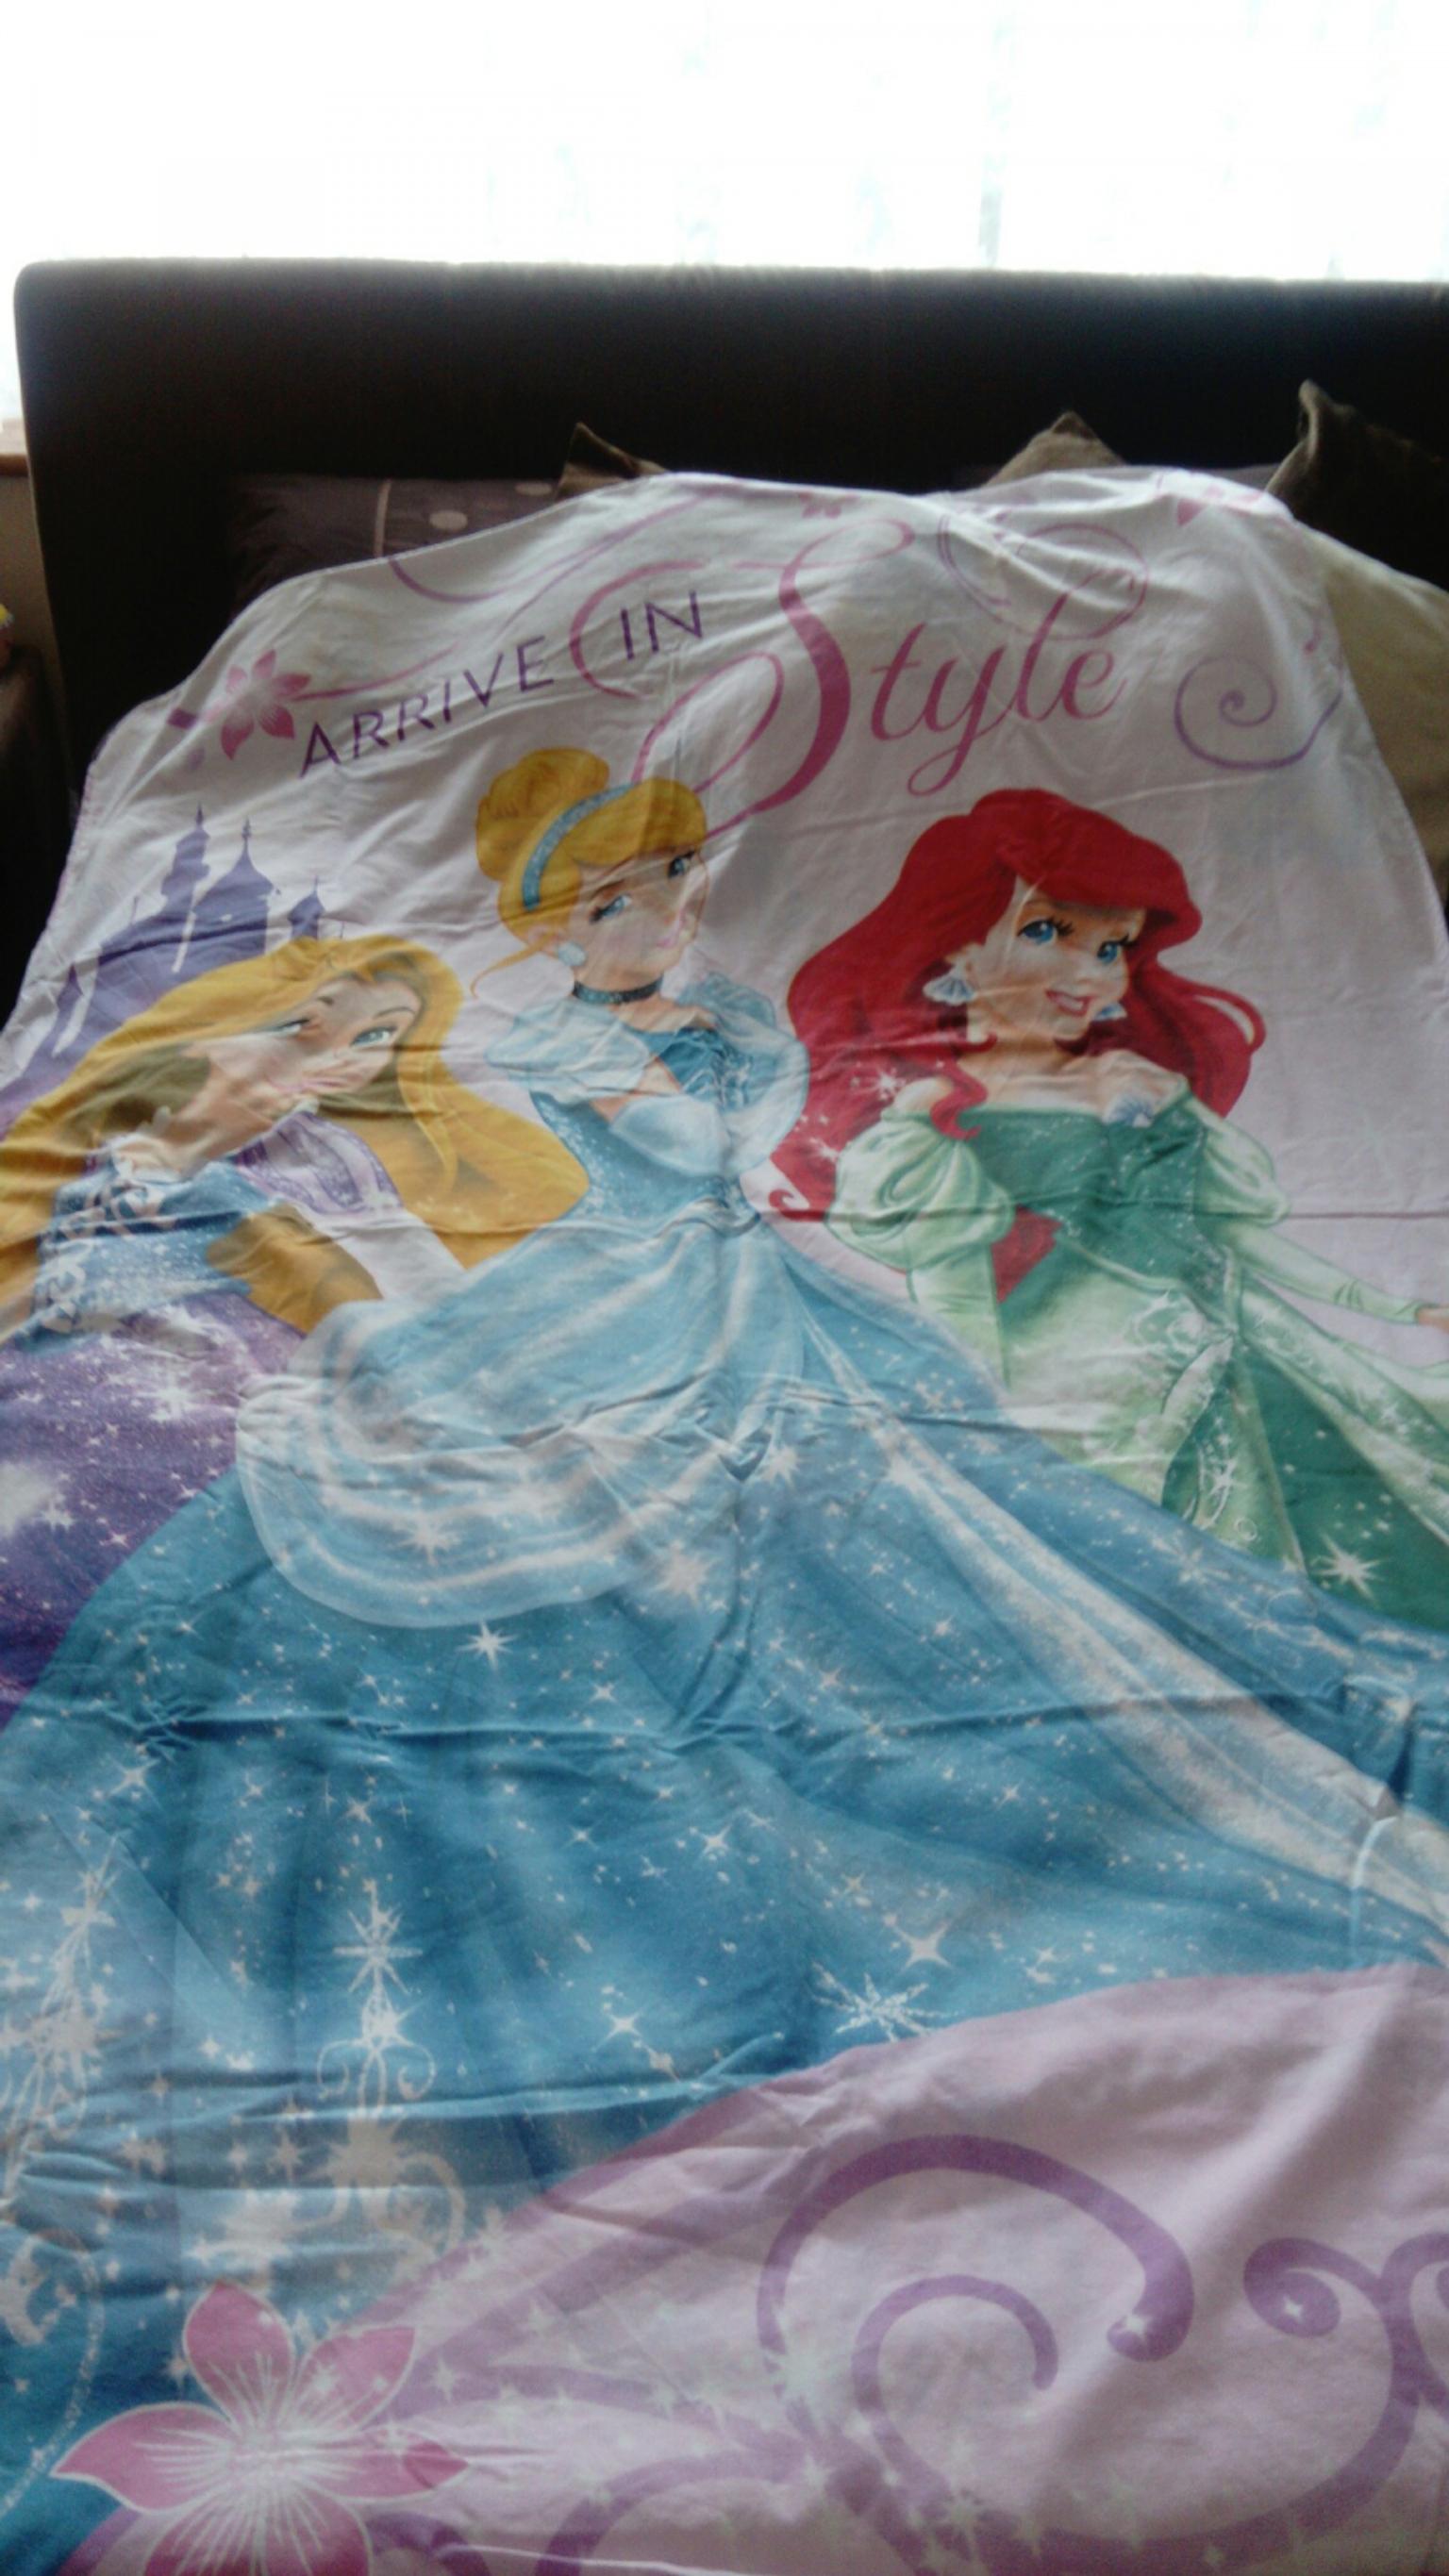 Disney Princess Reversible Duvet Cover In Me2 Cuxton For 5 00 For